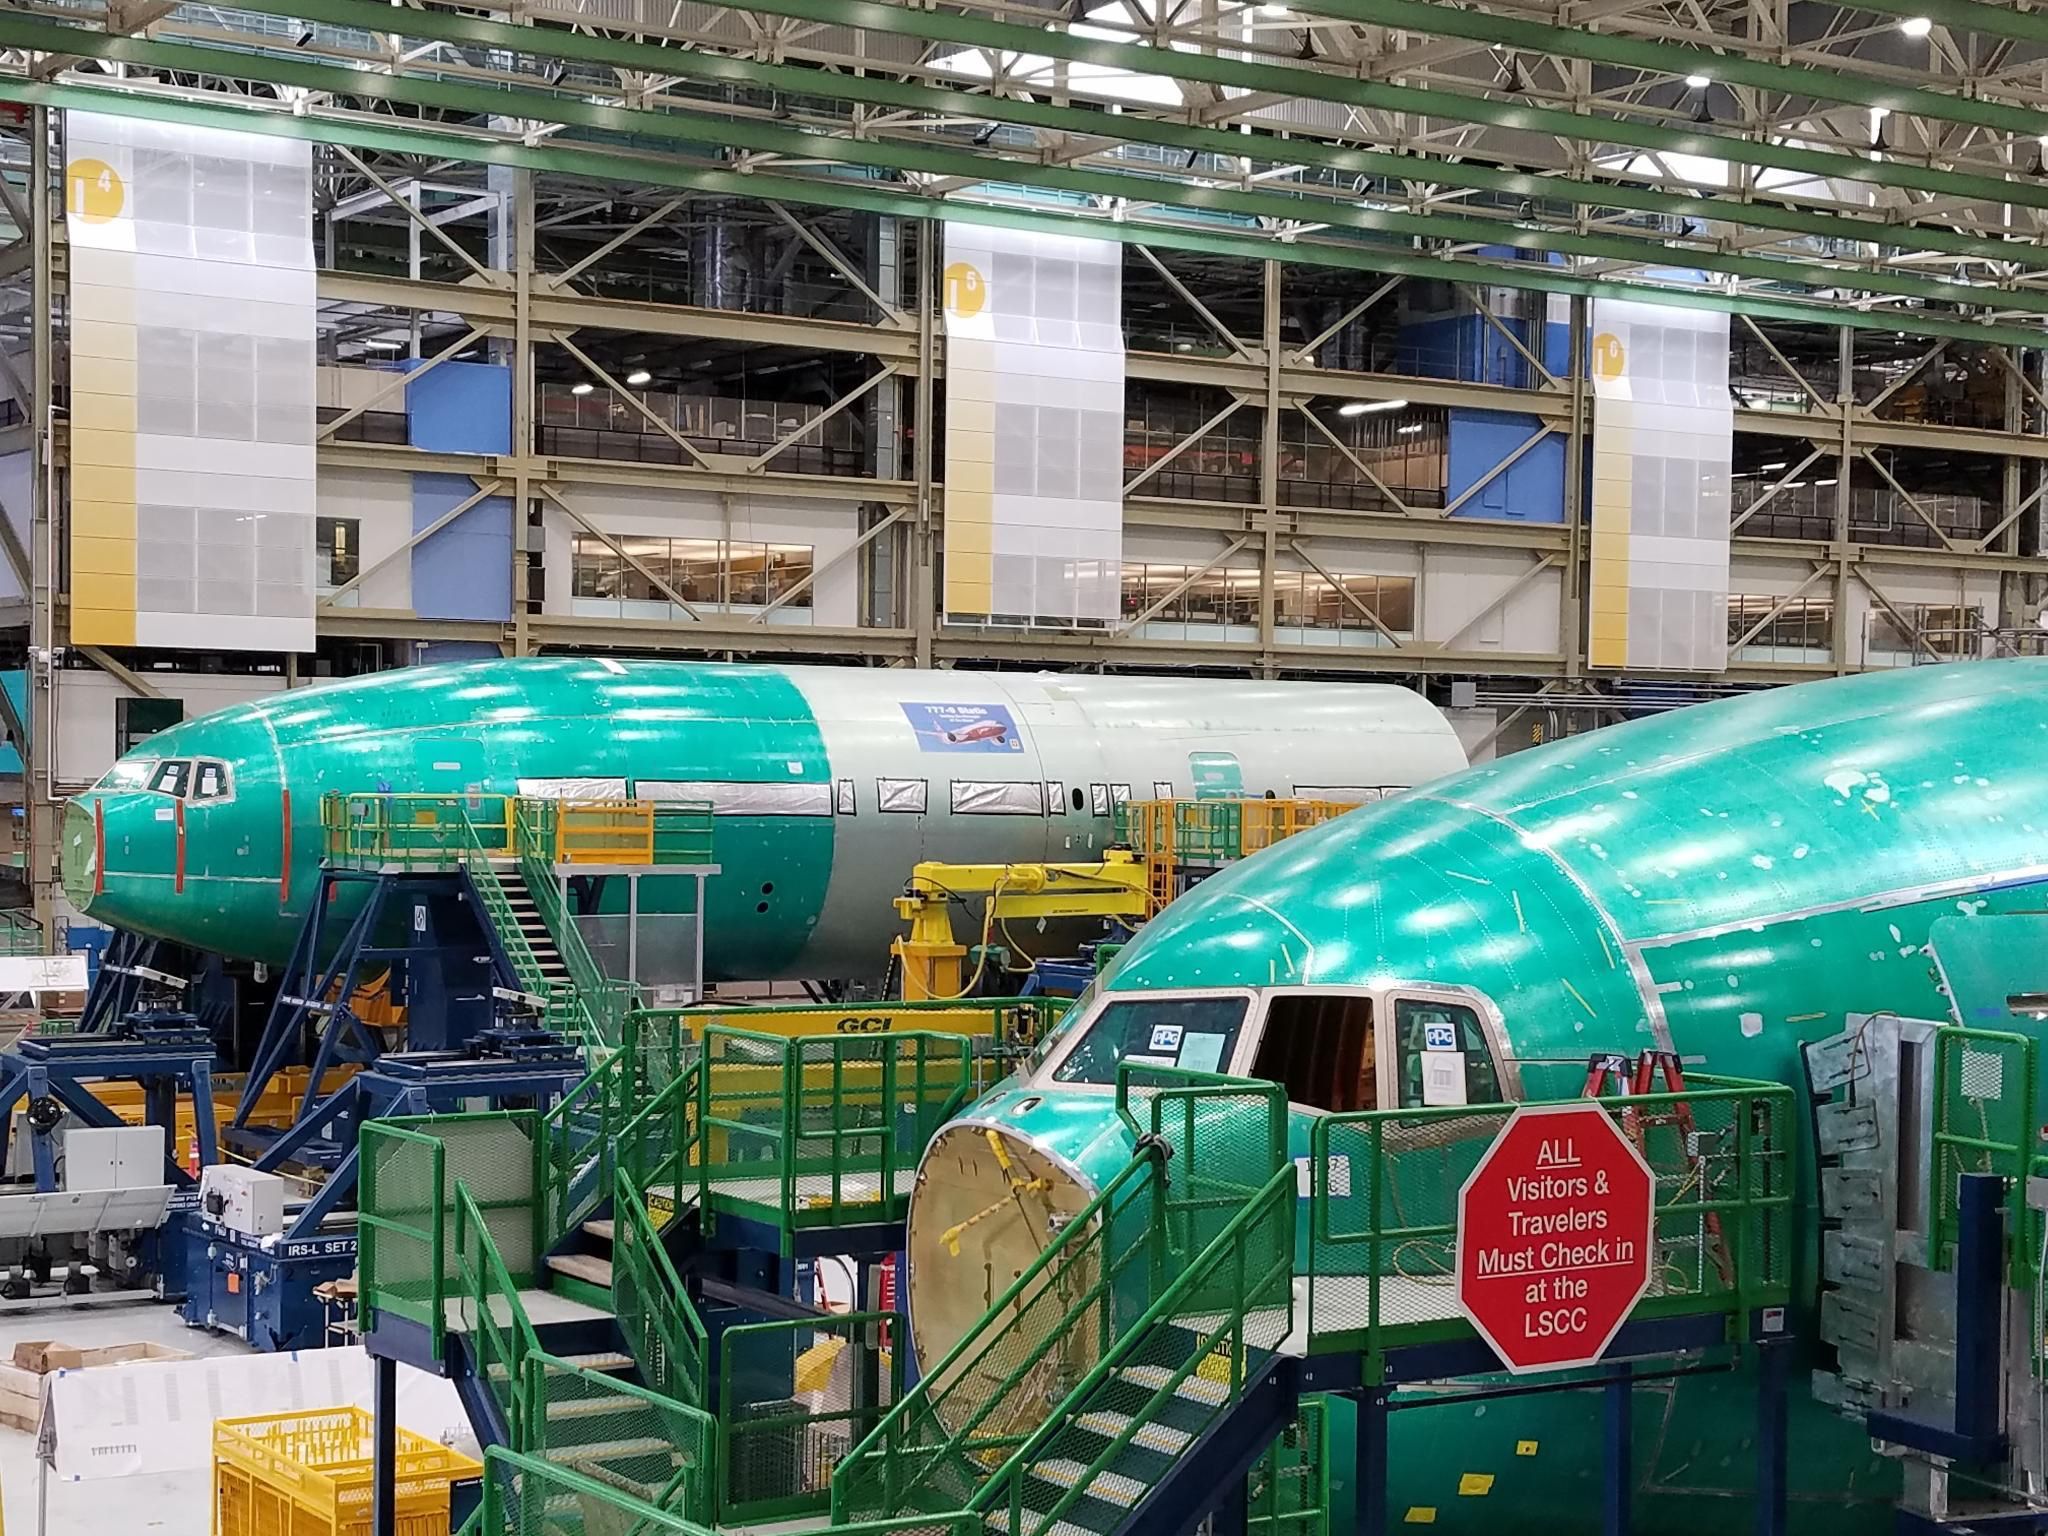 Boeing 777X test models in the warehouse.